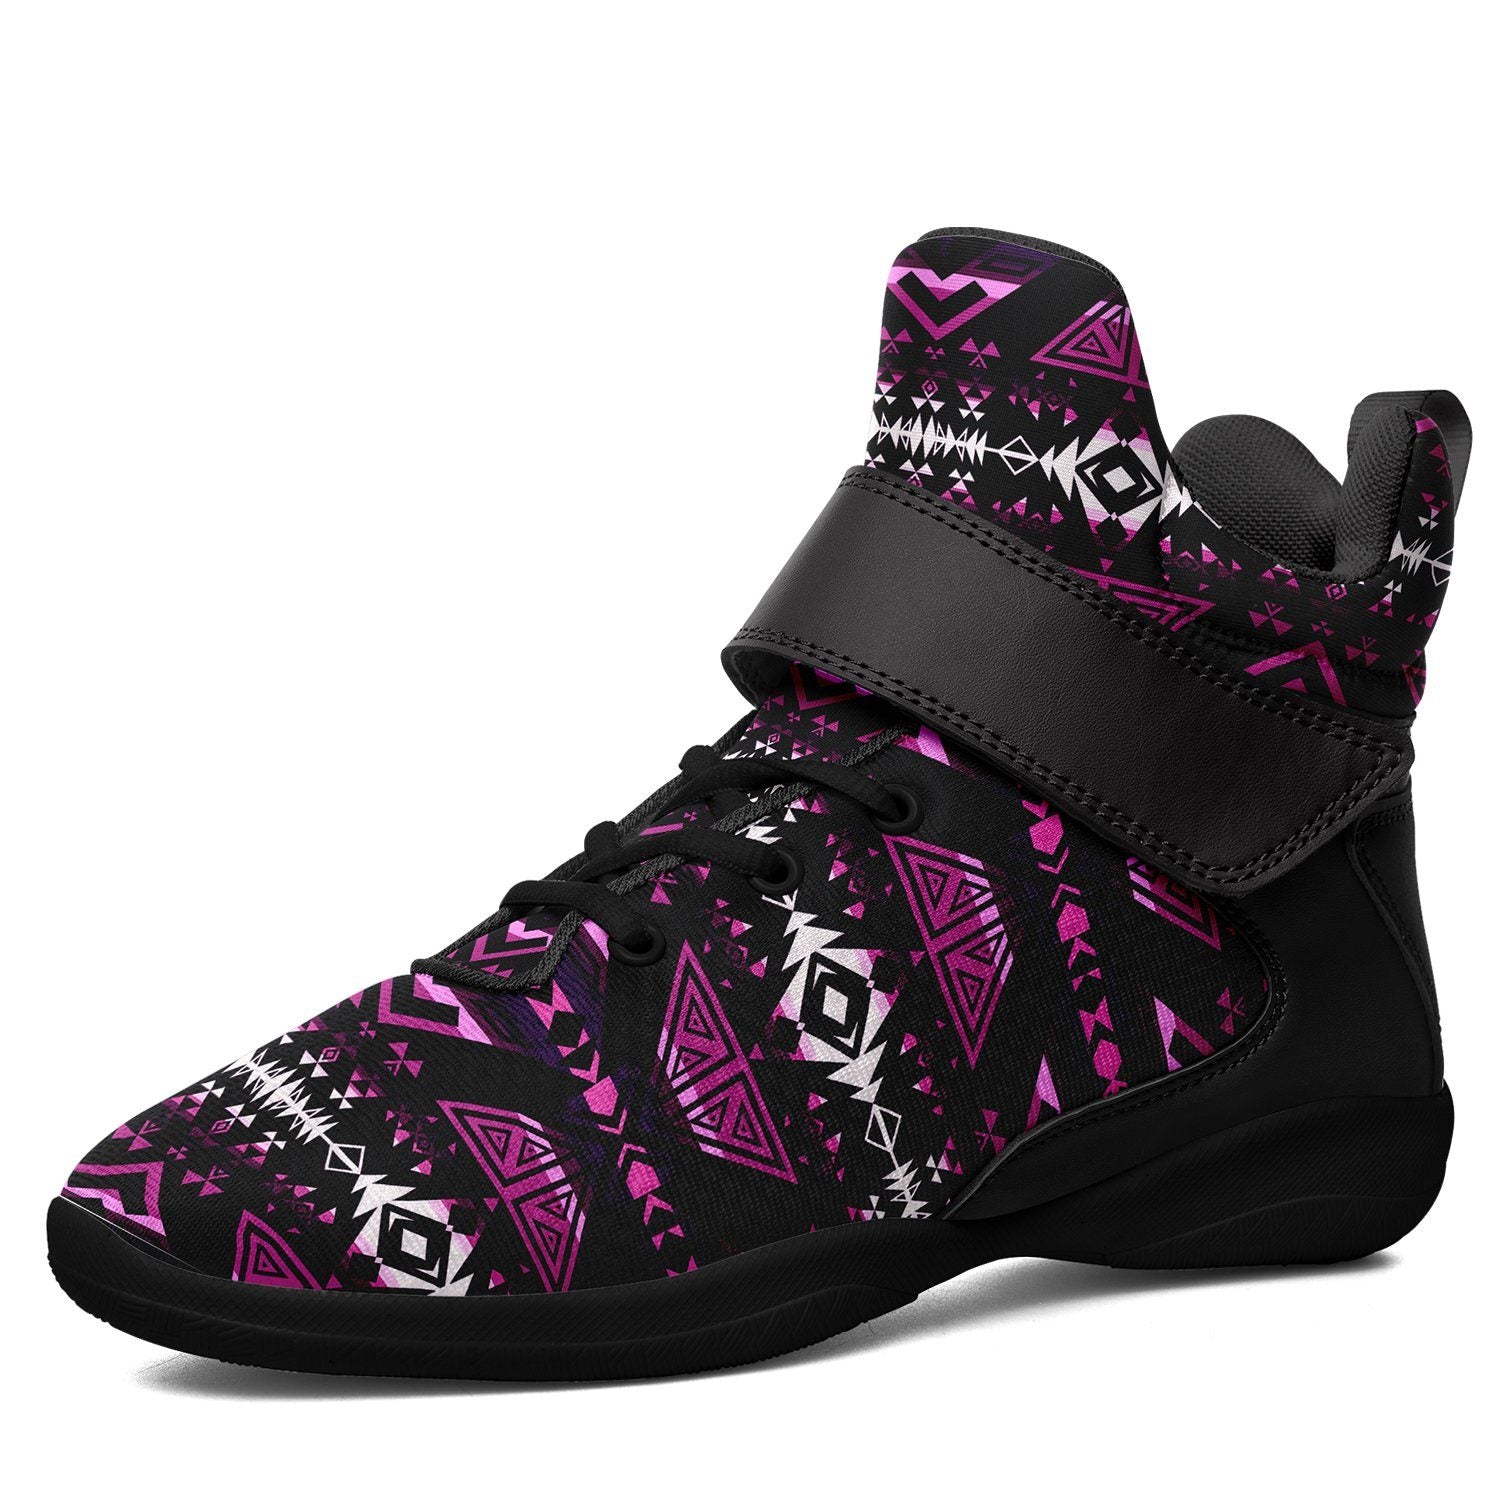 Upstream Expedition Moonlight Shadows Ipottaa Basketball / Sport High Top Shoes 49 Dzine US Women 4.5 / US Youth 3.5 / EUR 35 Black Sole with Black Strap 